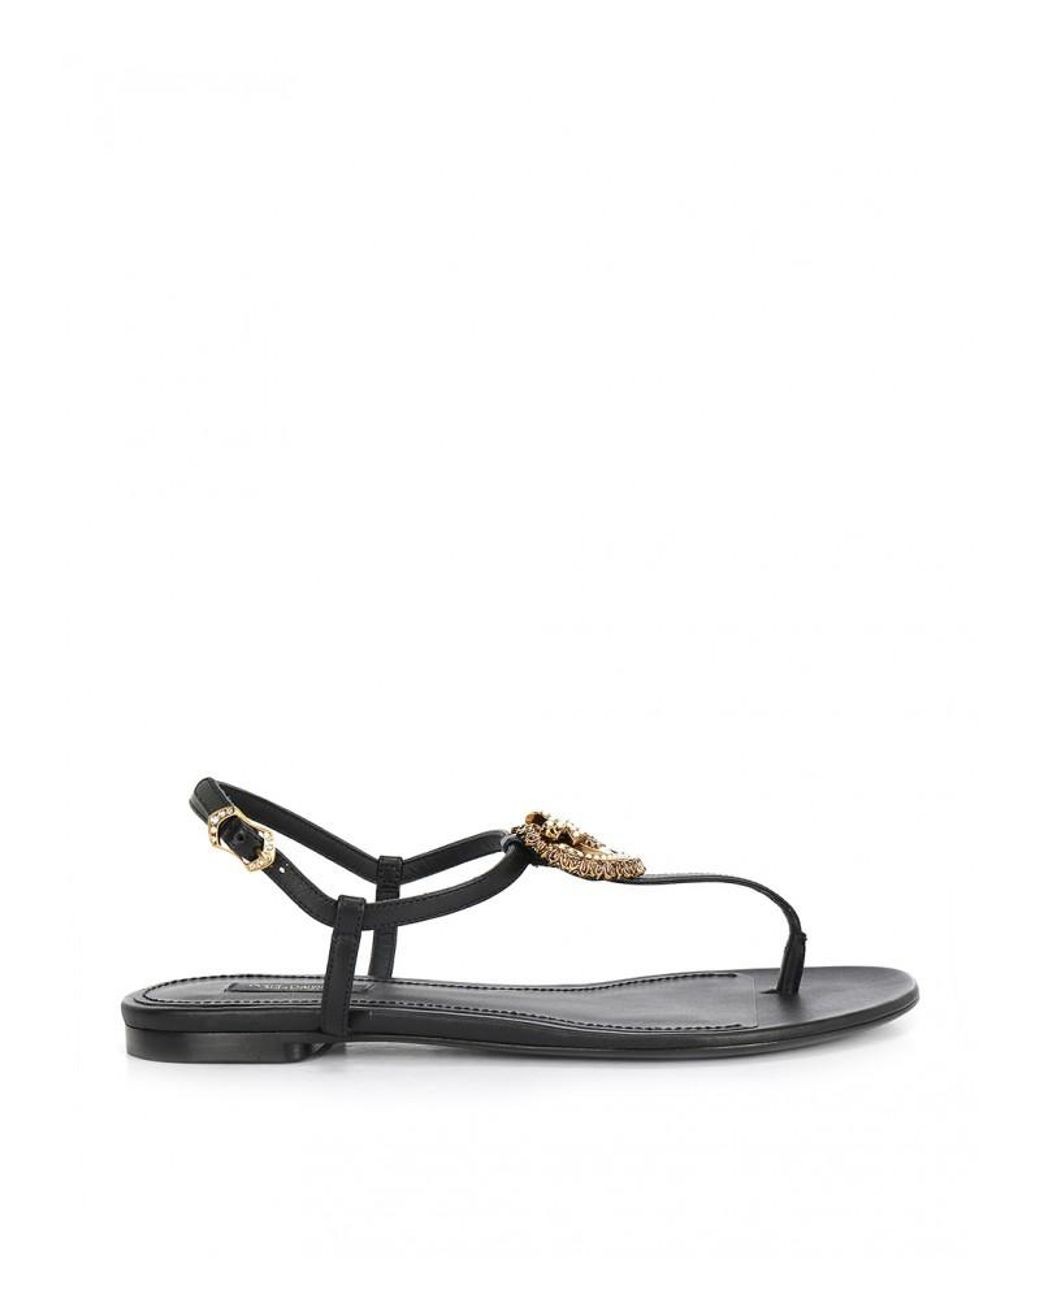 Dolce & Gabbana Leather Thong Sandals in Black - Lyst